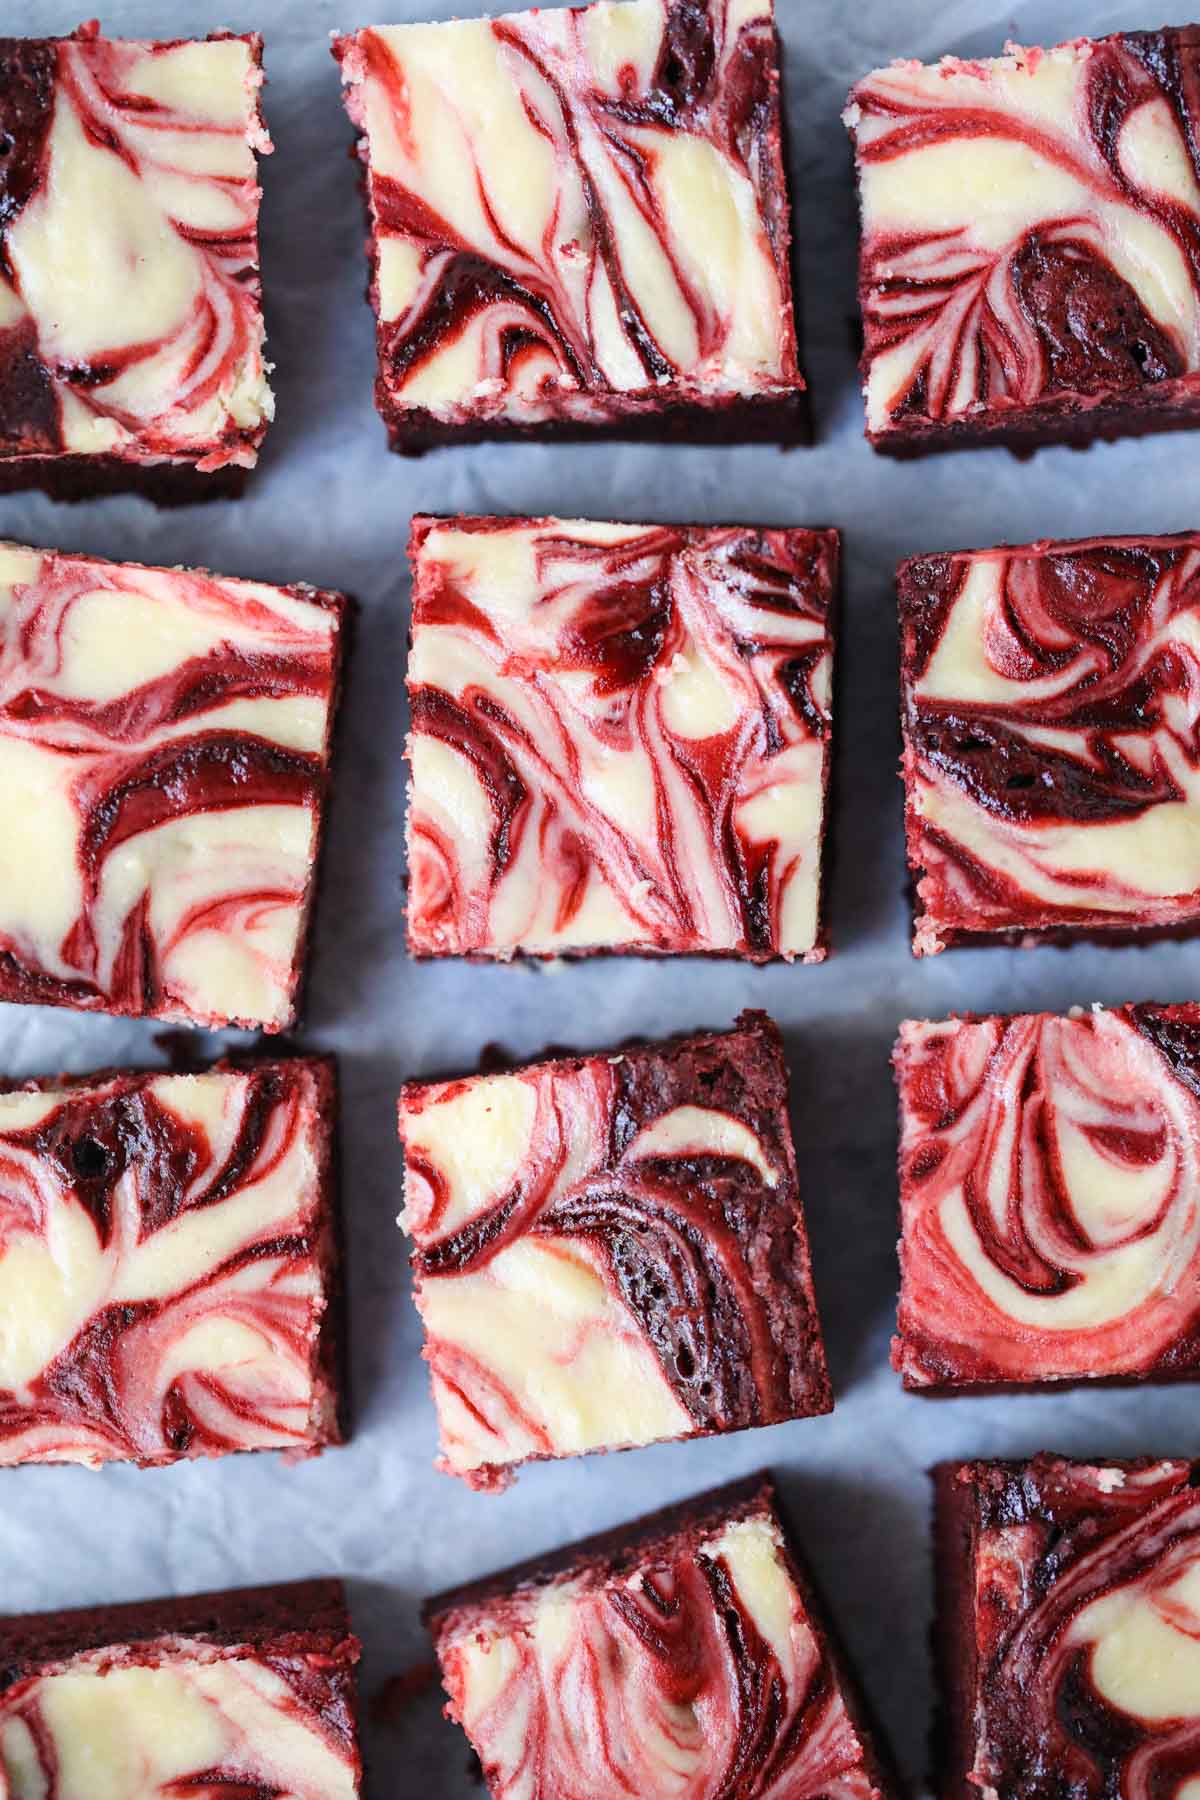 Red velvet cheesecake brownies arranged on parchment paper.